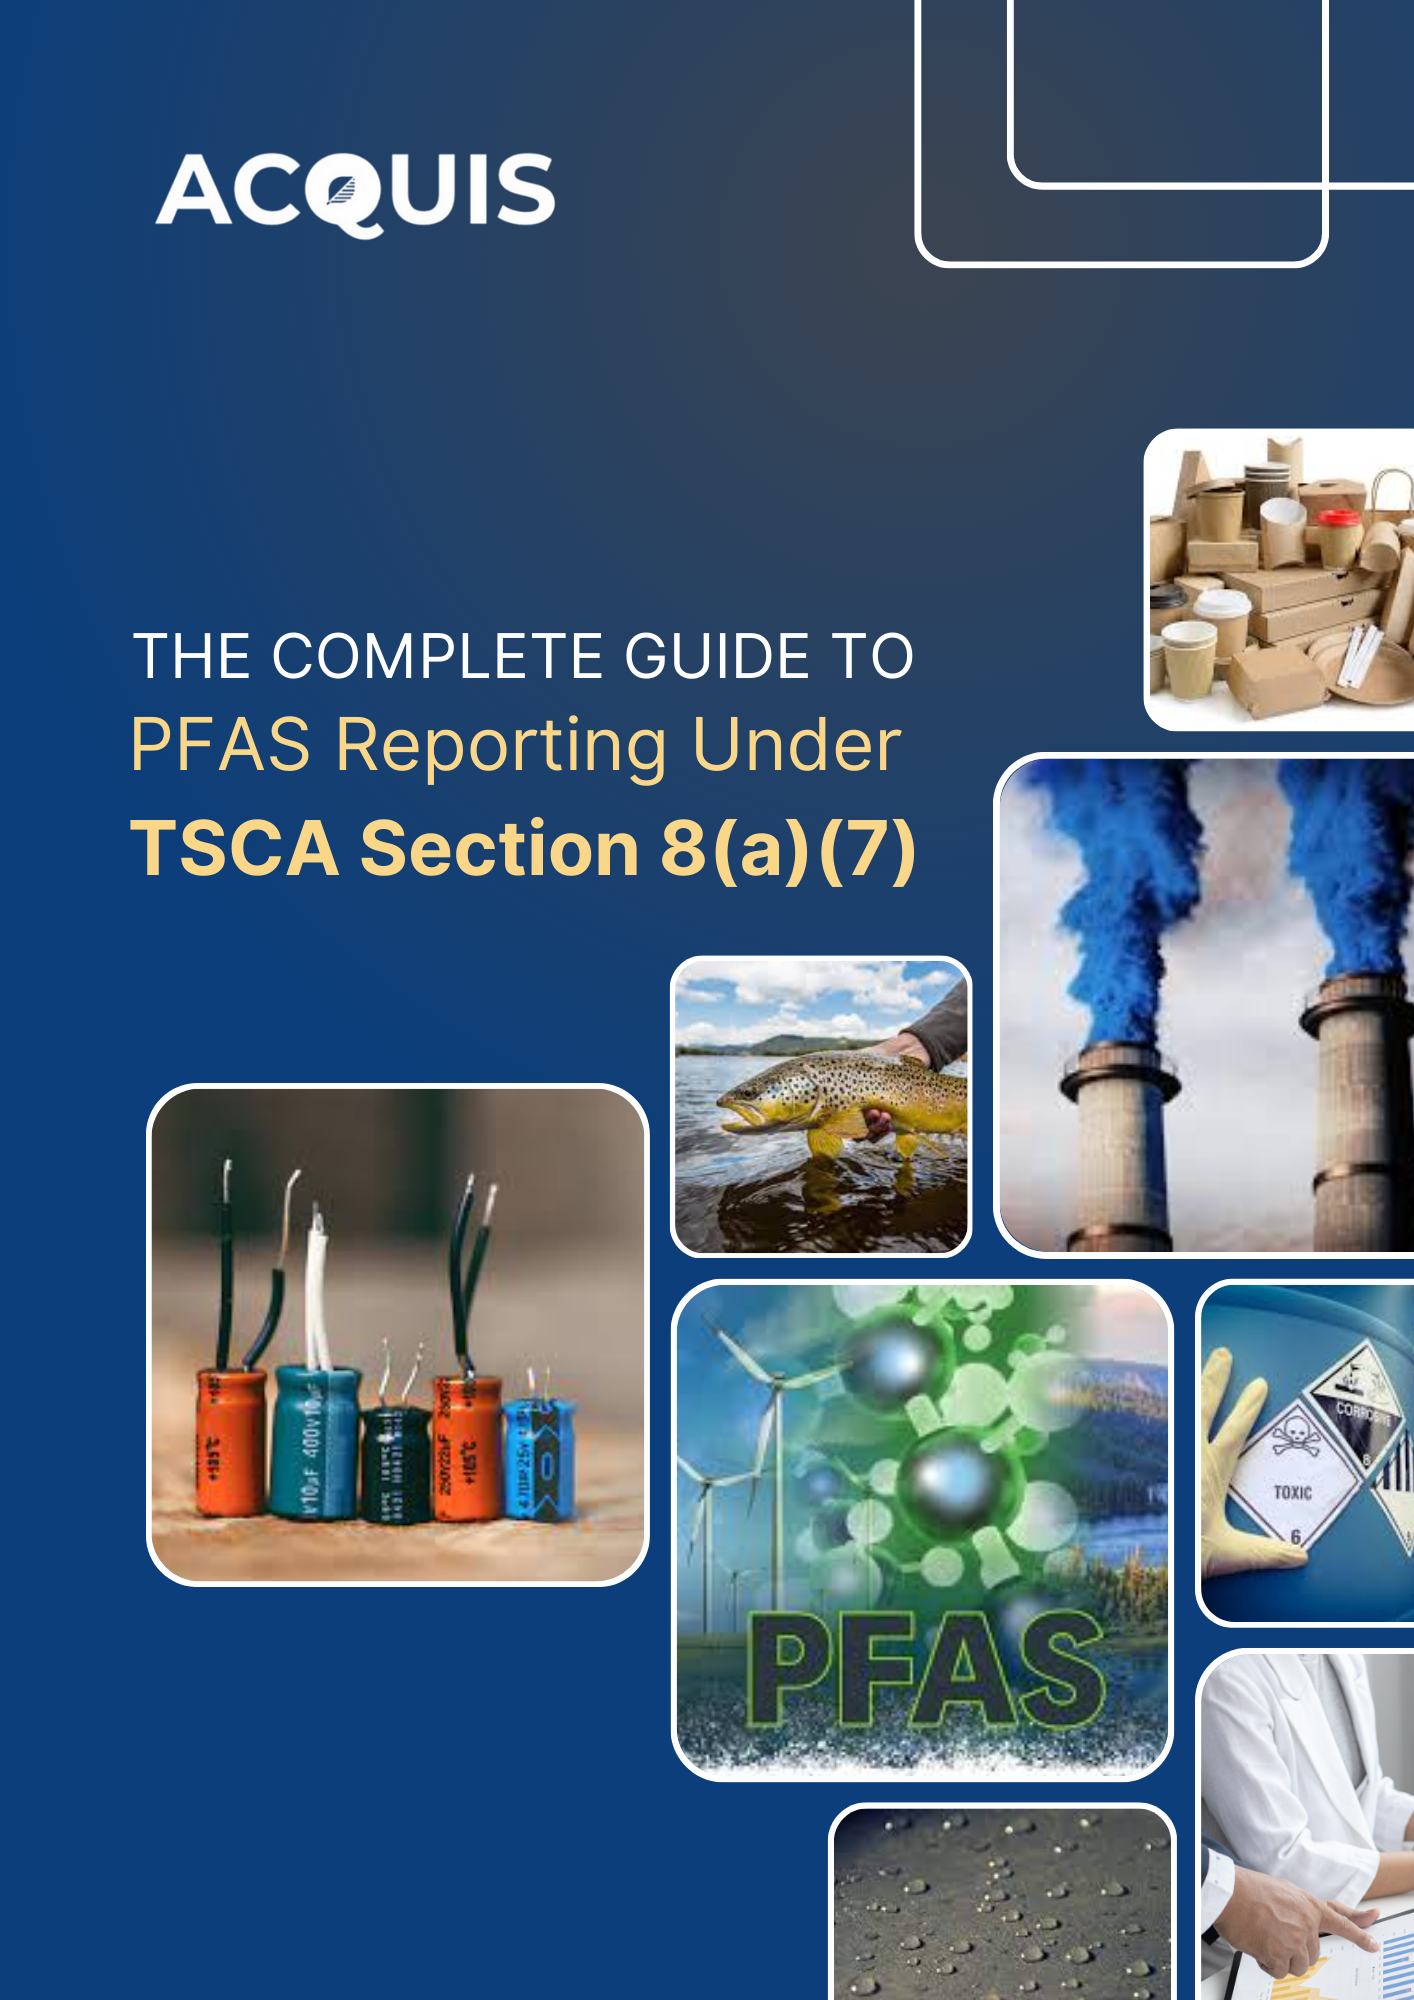 The Complete Guide to PFAS Reporting Under TSCA Section 8(a)(7)